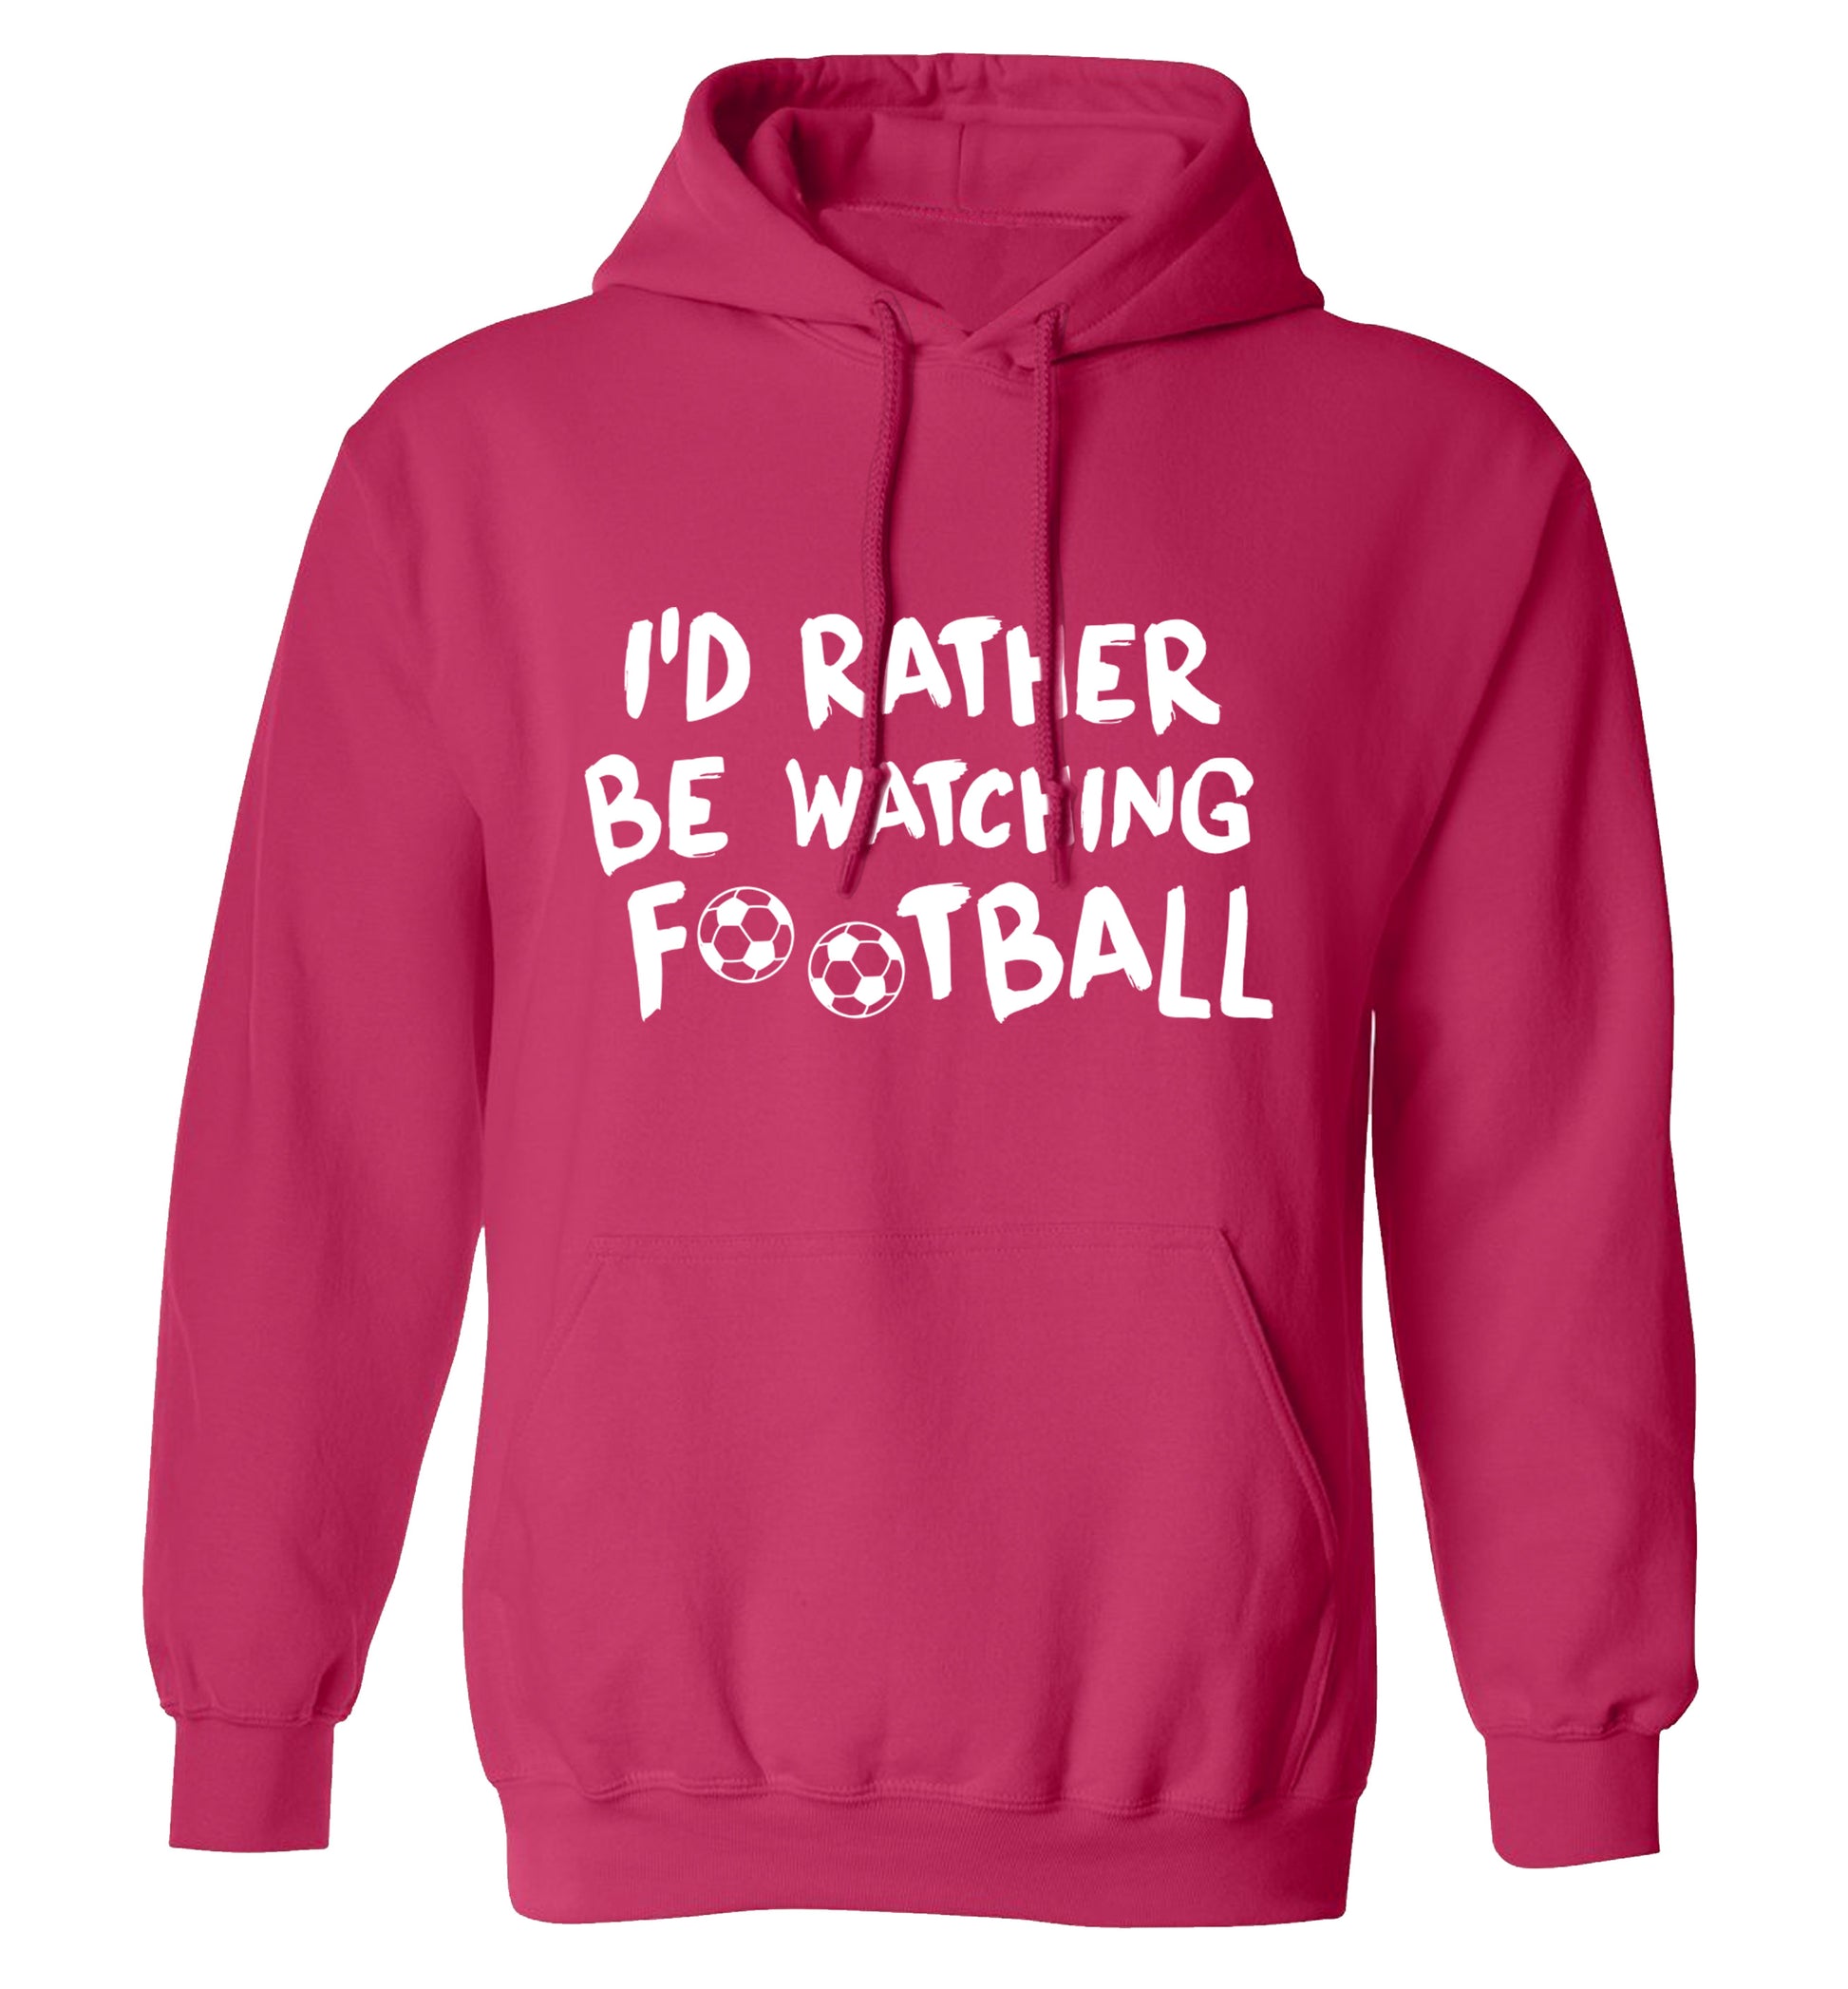 I'd rather be watching football adults unisexpink hoodie 2XL